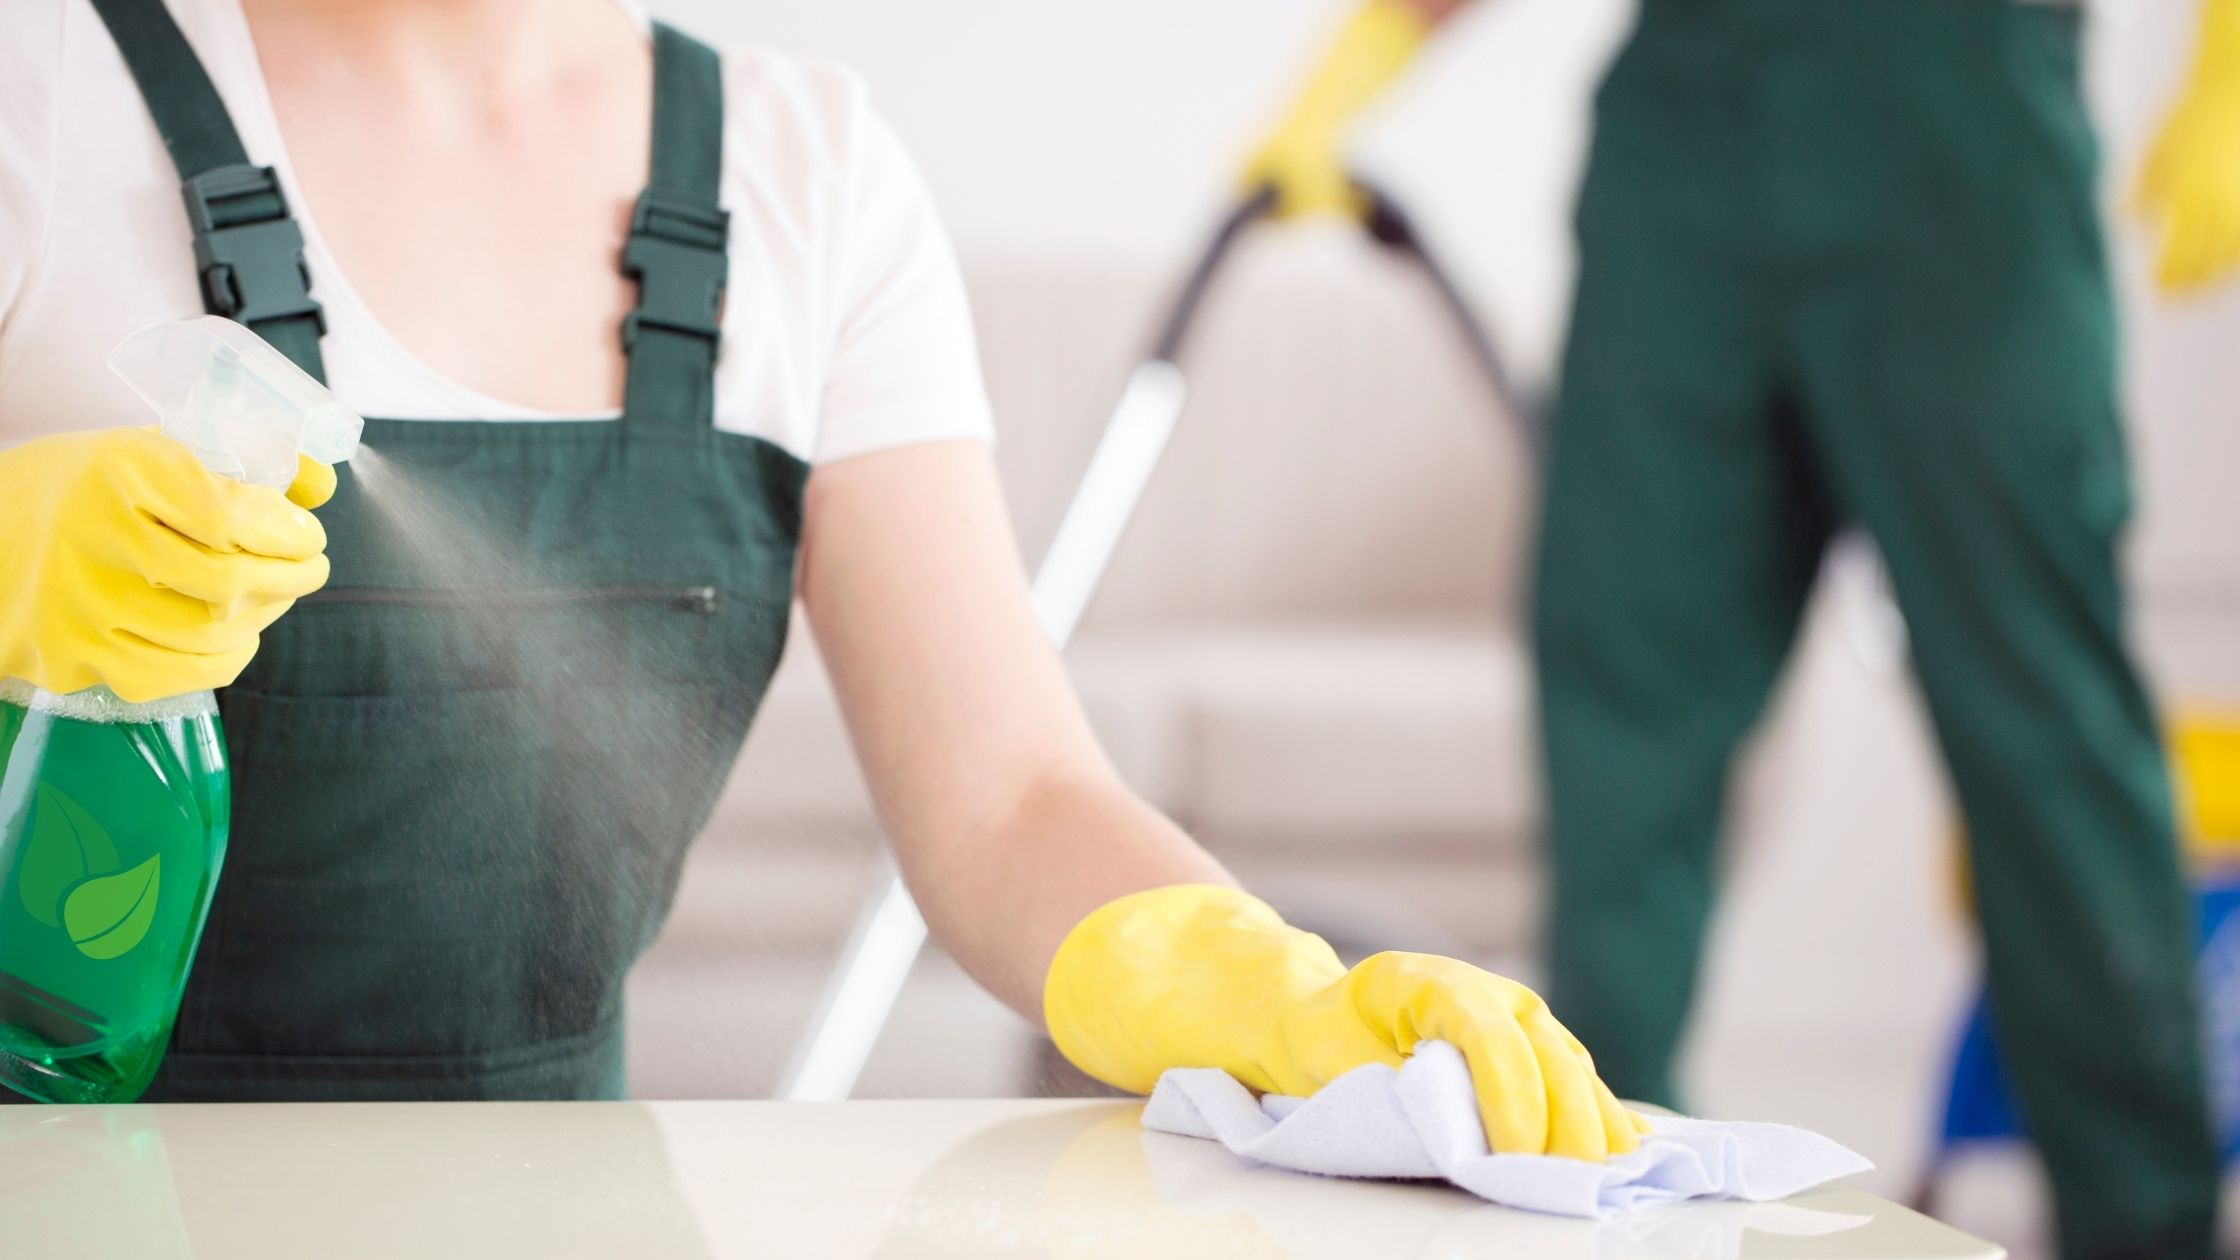 Even Your Business’s Cleaning Services Can Go Green For Earth Day